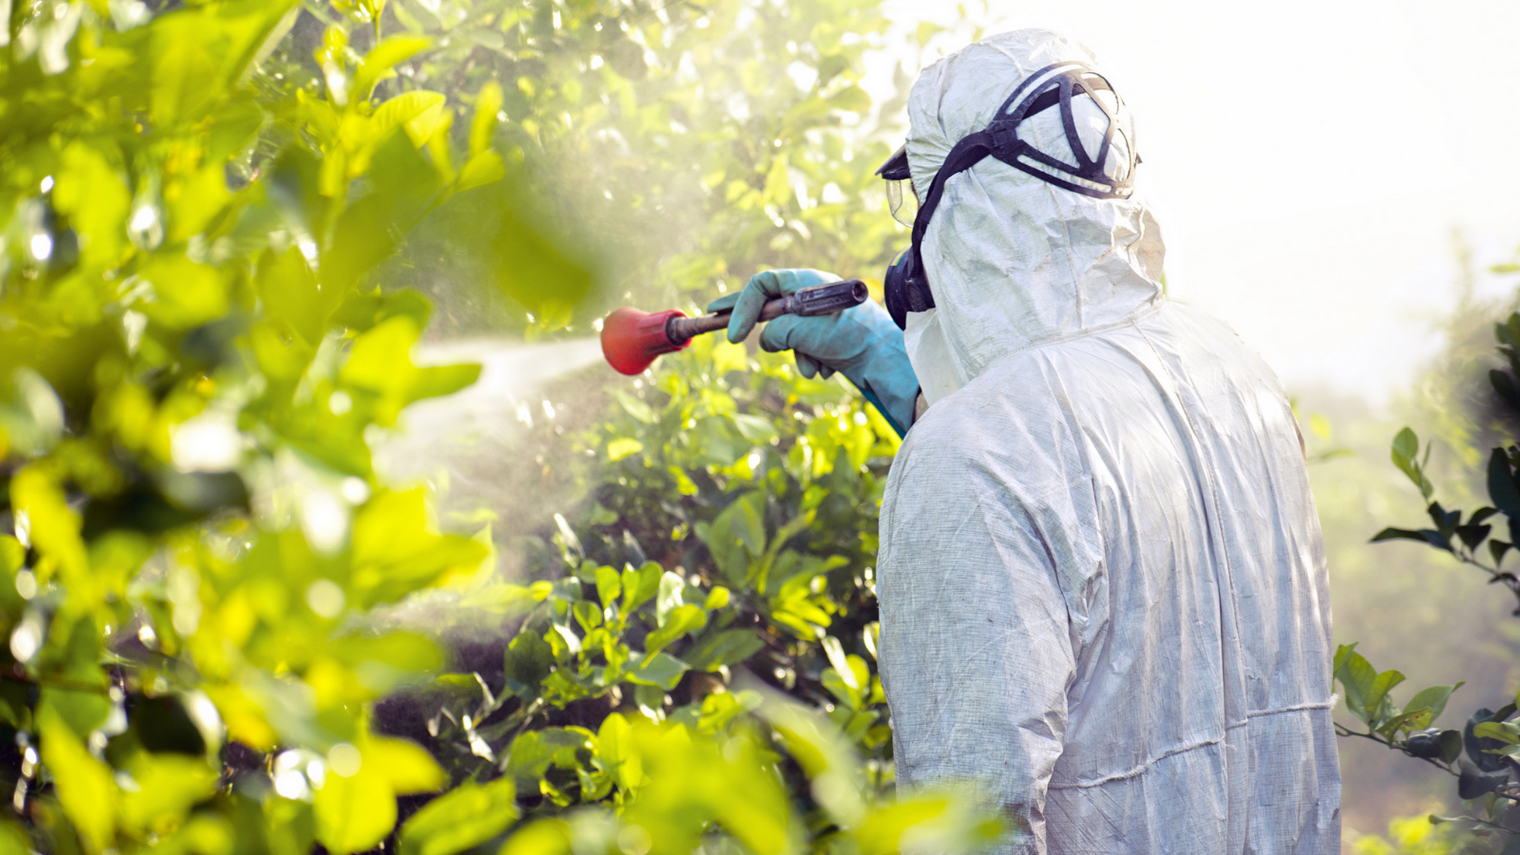 For 10 years, the amount of pesticides in European fruits and vegetables has increased dramatically